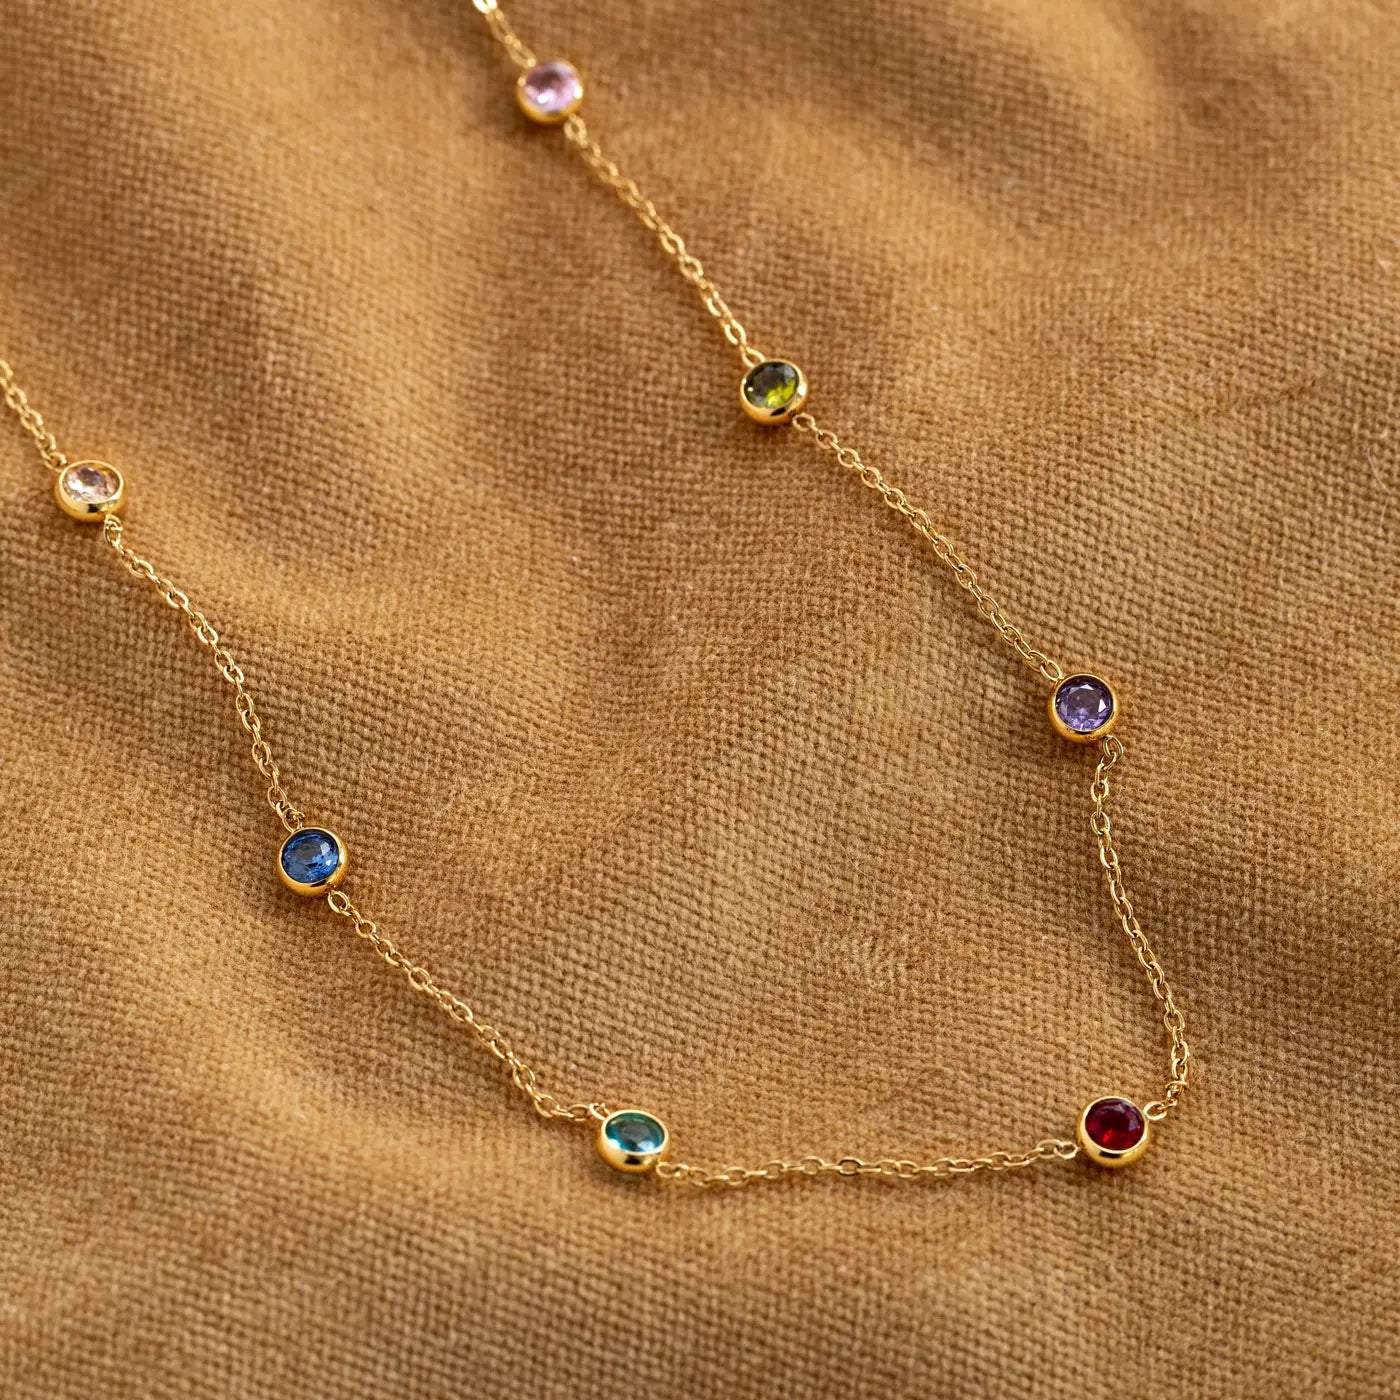 Michelle - Necklace with Gold Dipped Multi Colored Crystals Stainless